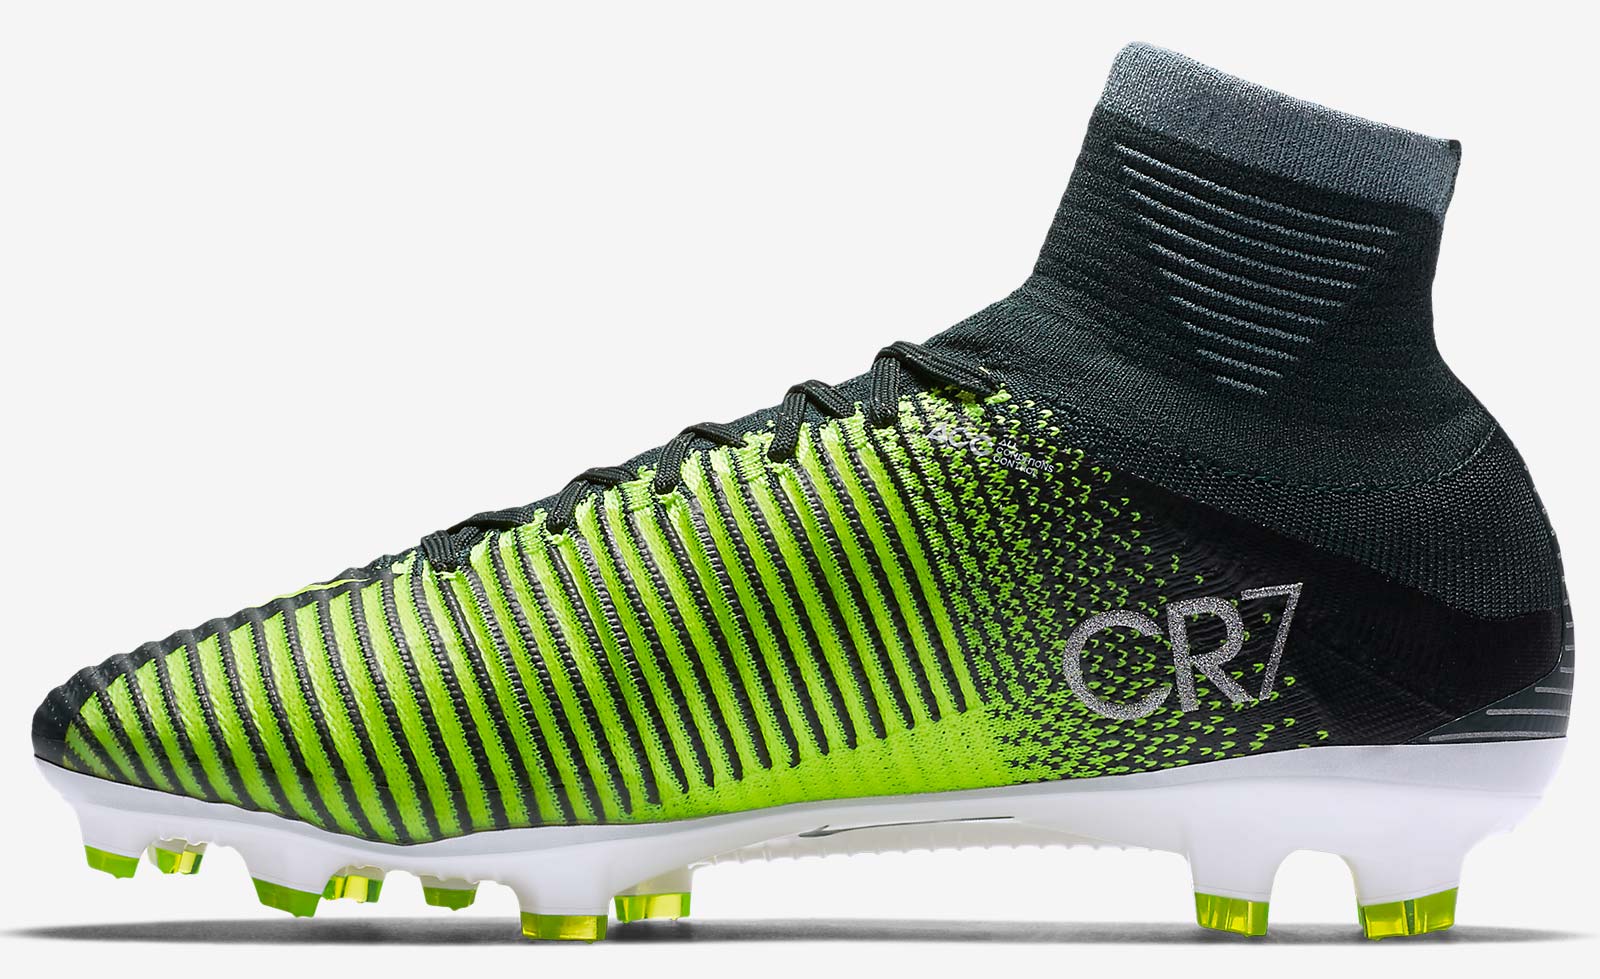 Nike Mercurial Superfly Cristiano Ronaldo 3 Discovery Boots Released - Footy Headlines